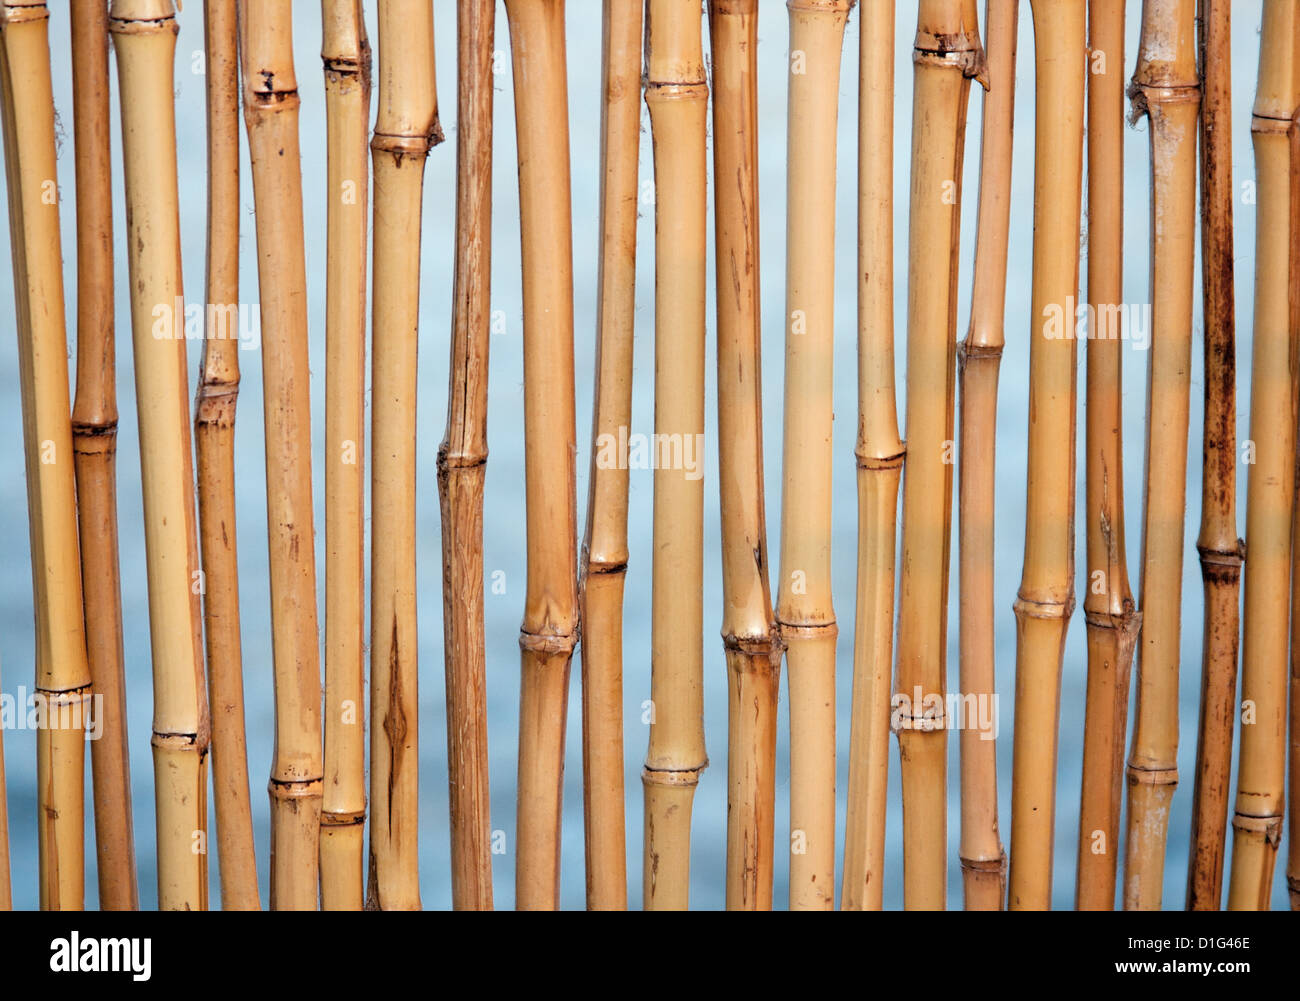 Bamboo background texture with columns of wood Stock Photo